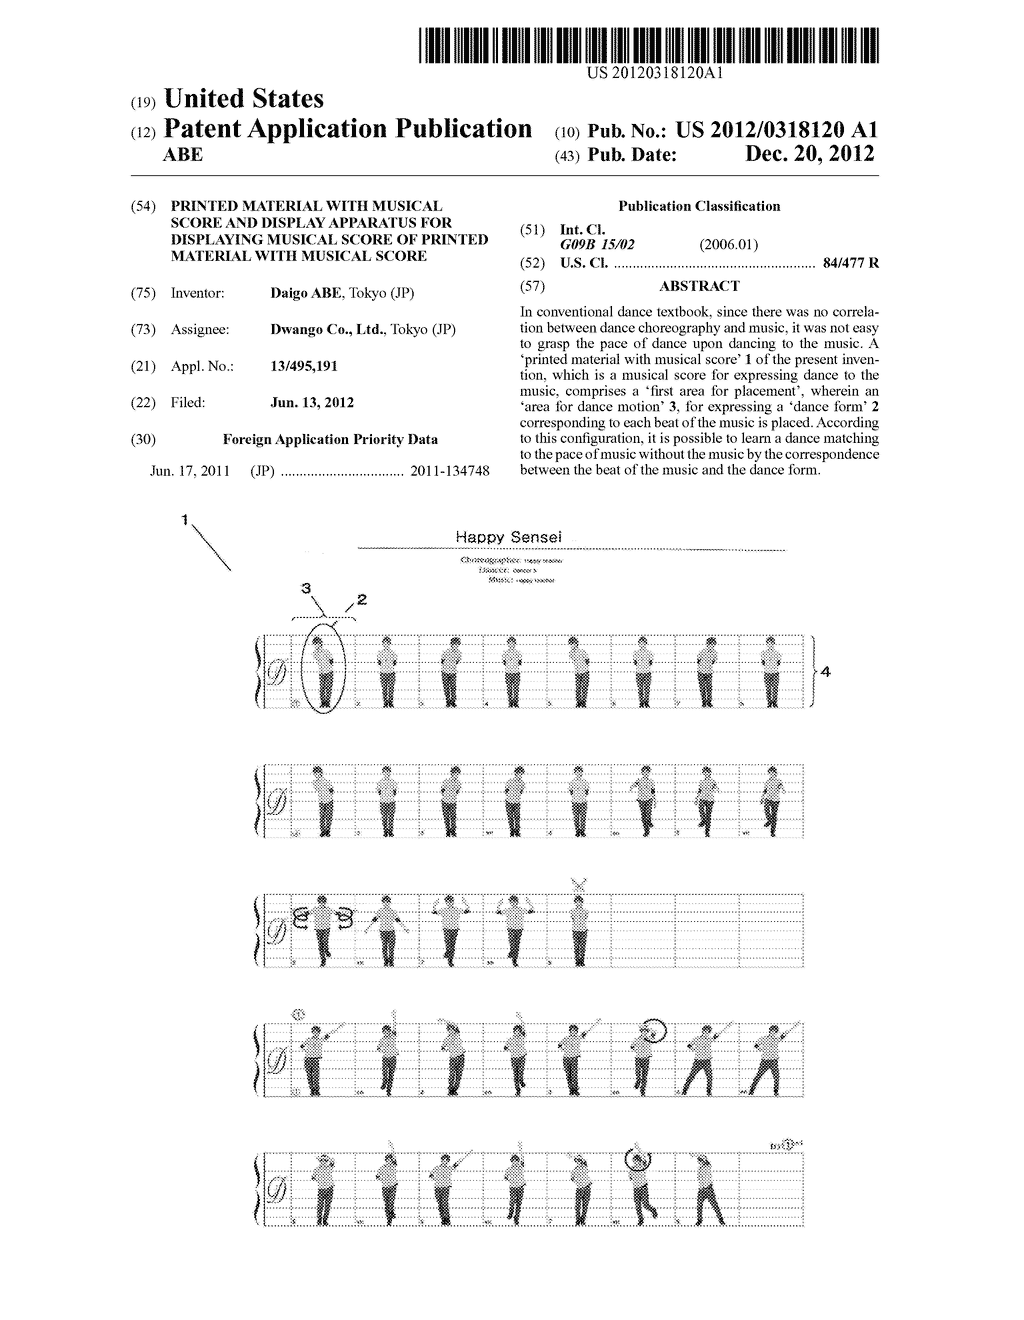 PRINTED MATERIAL WITH MUSICAL SCORE AND DISPLAY APPARATUS FOR DISPLAYING     MUSICAL SCORE OF PRINTED MATERIAL WITH MUSICAL SCORE - diagram, schematic, and image 01